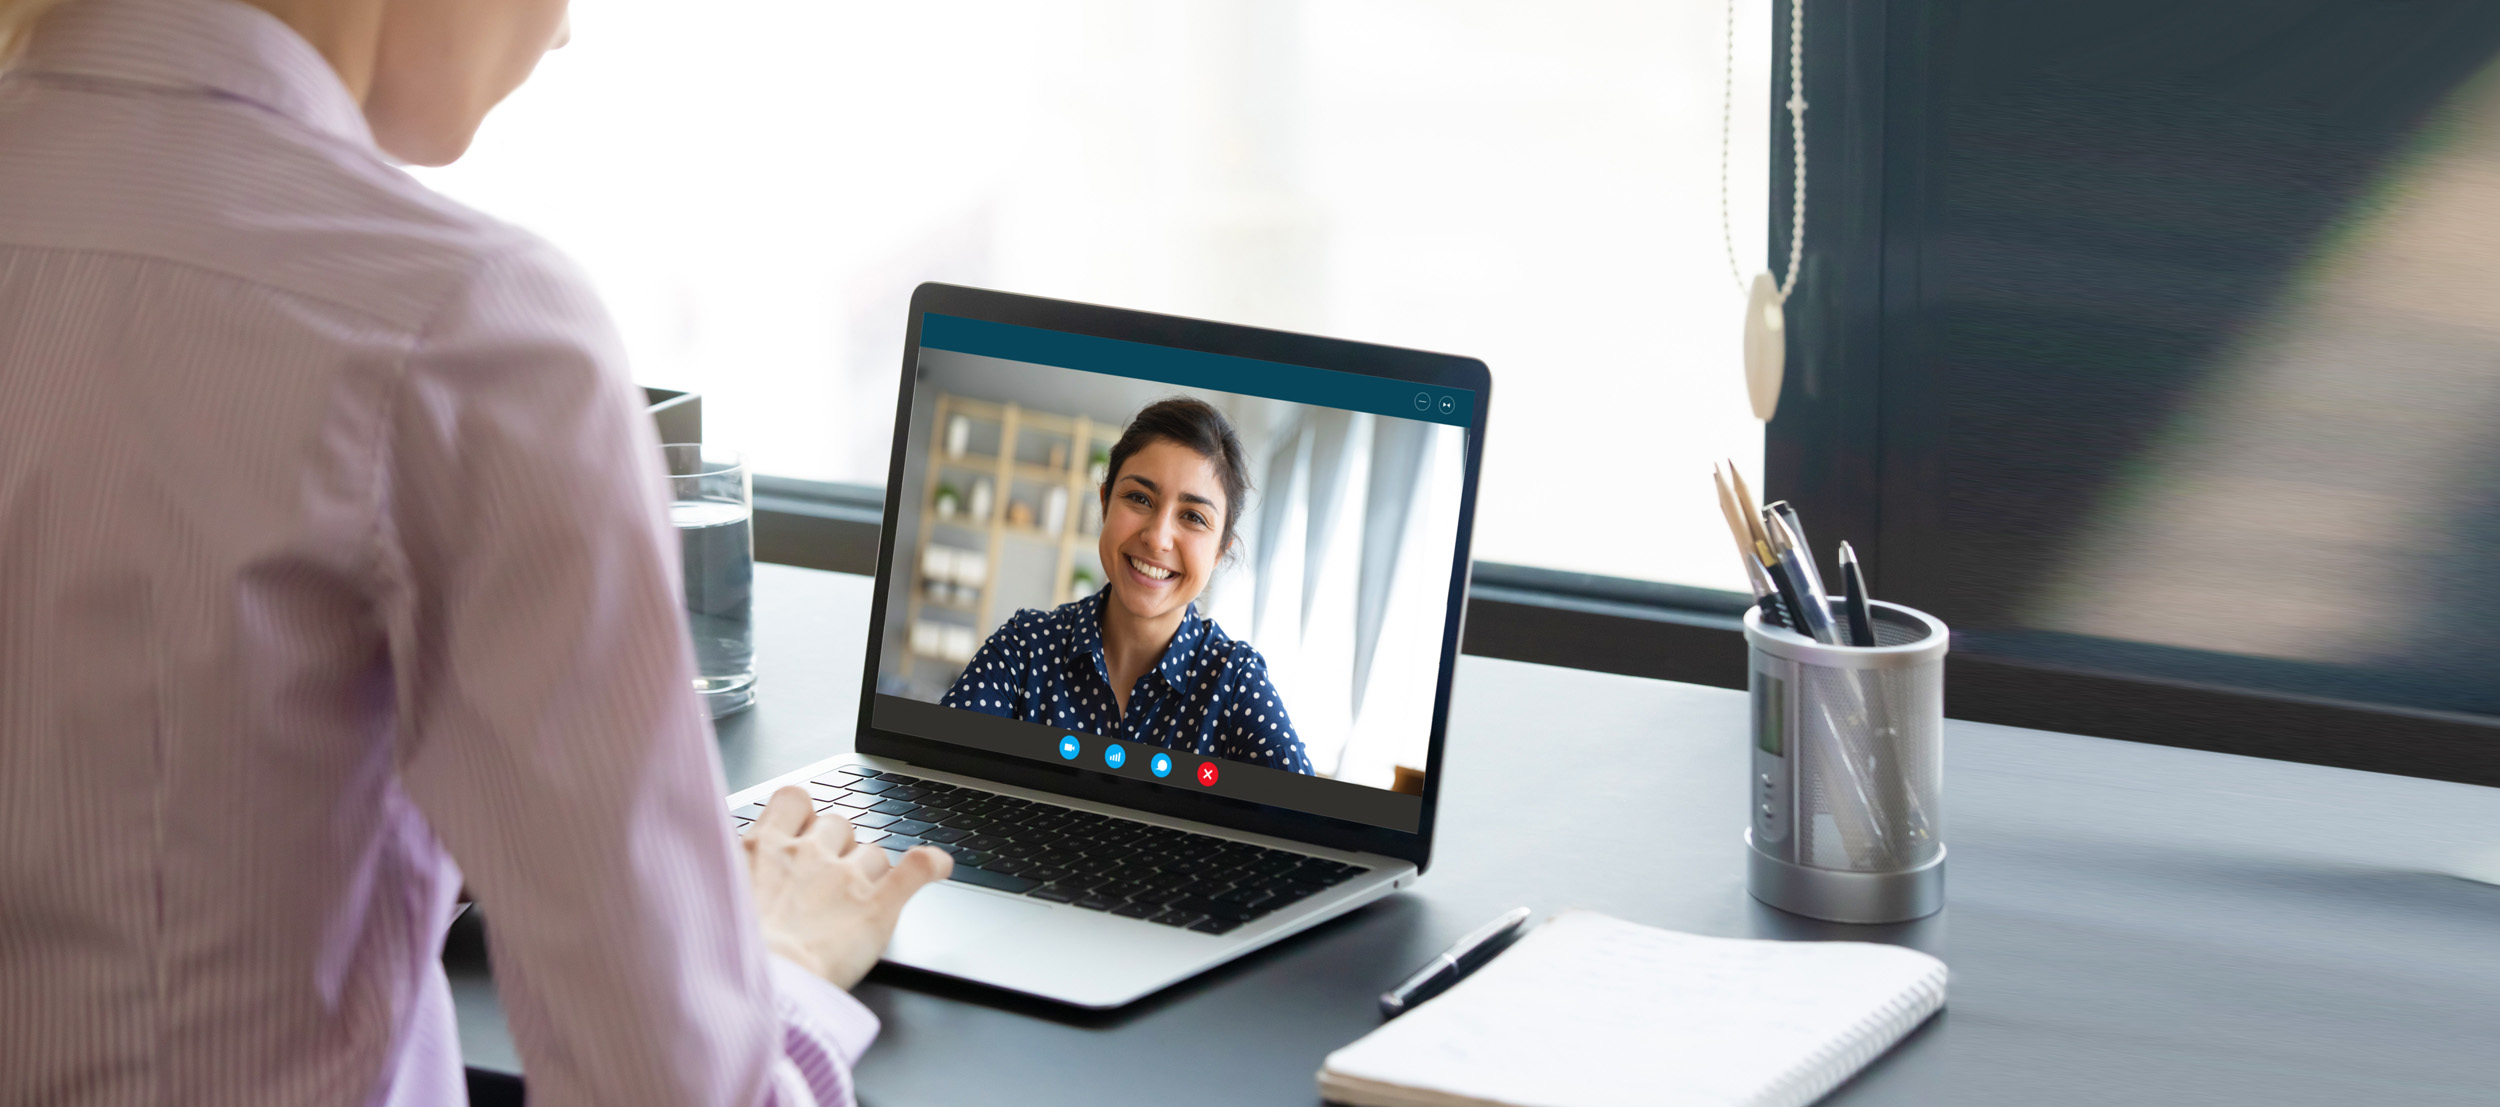 A telehealth counselor conducting a virtual meeting session with her client smiling on screen.